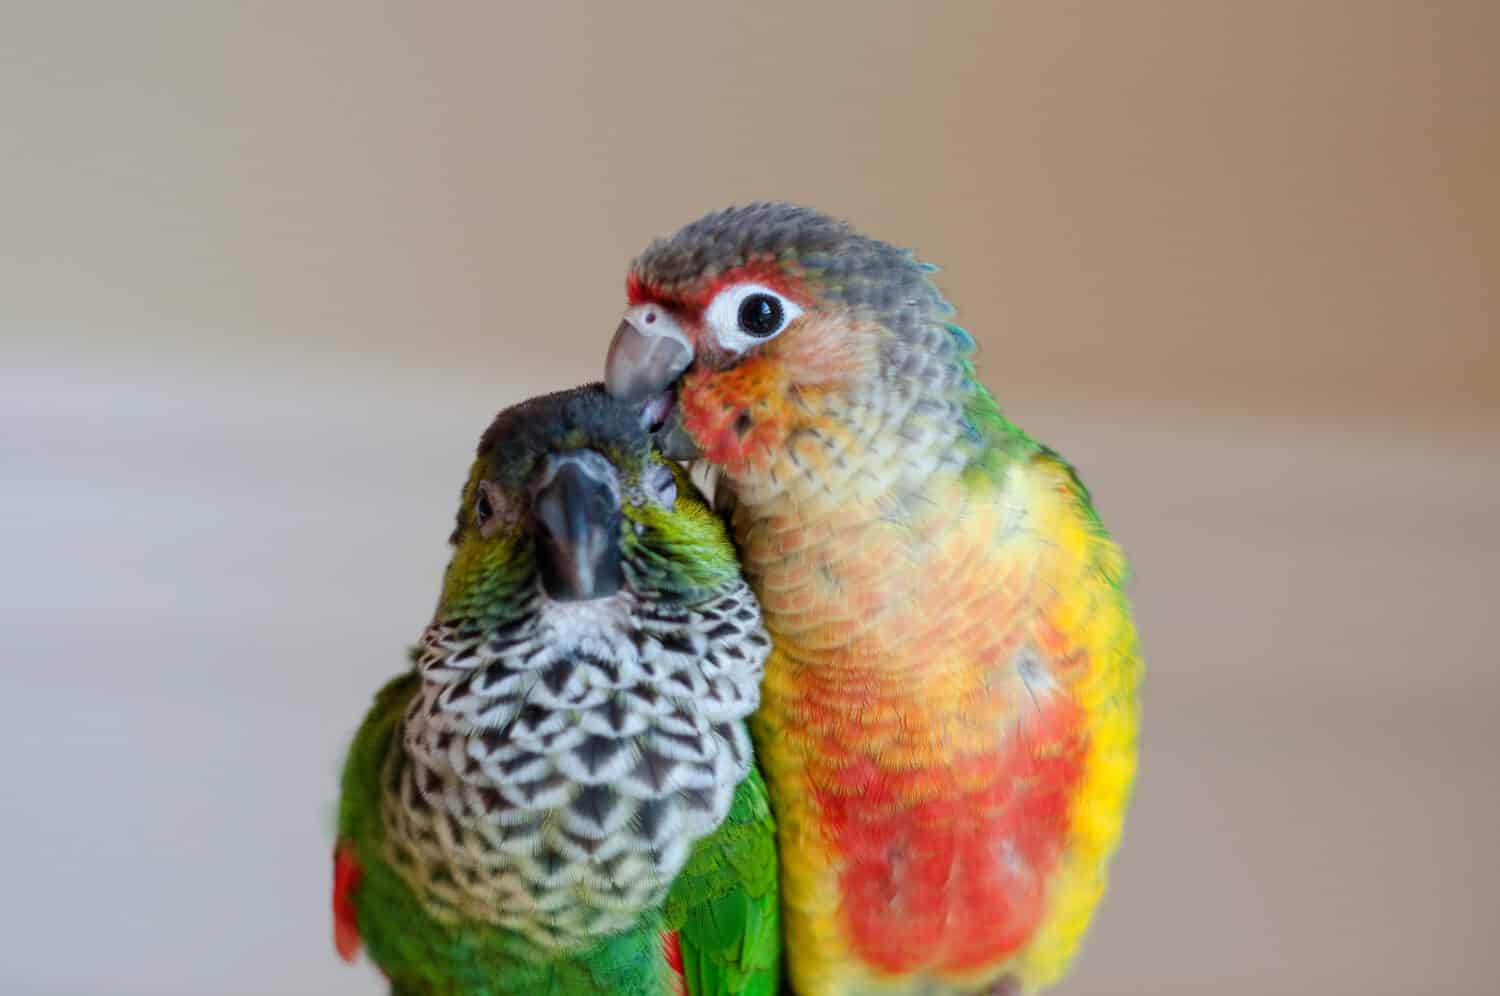 Happy Young black capped conure and high red yellow sided green cheeked conure enjoying each other's company cuddling scratching head